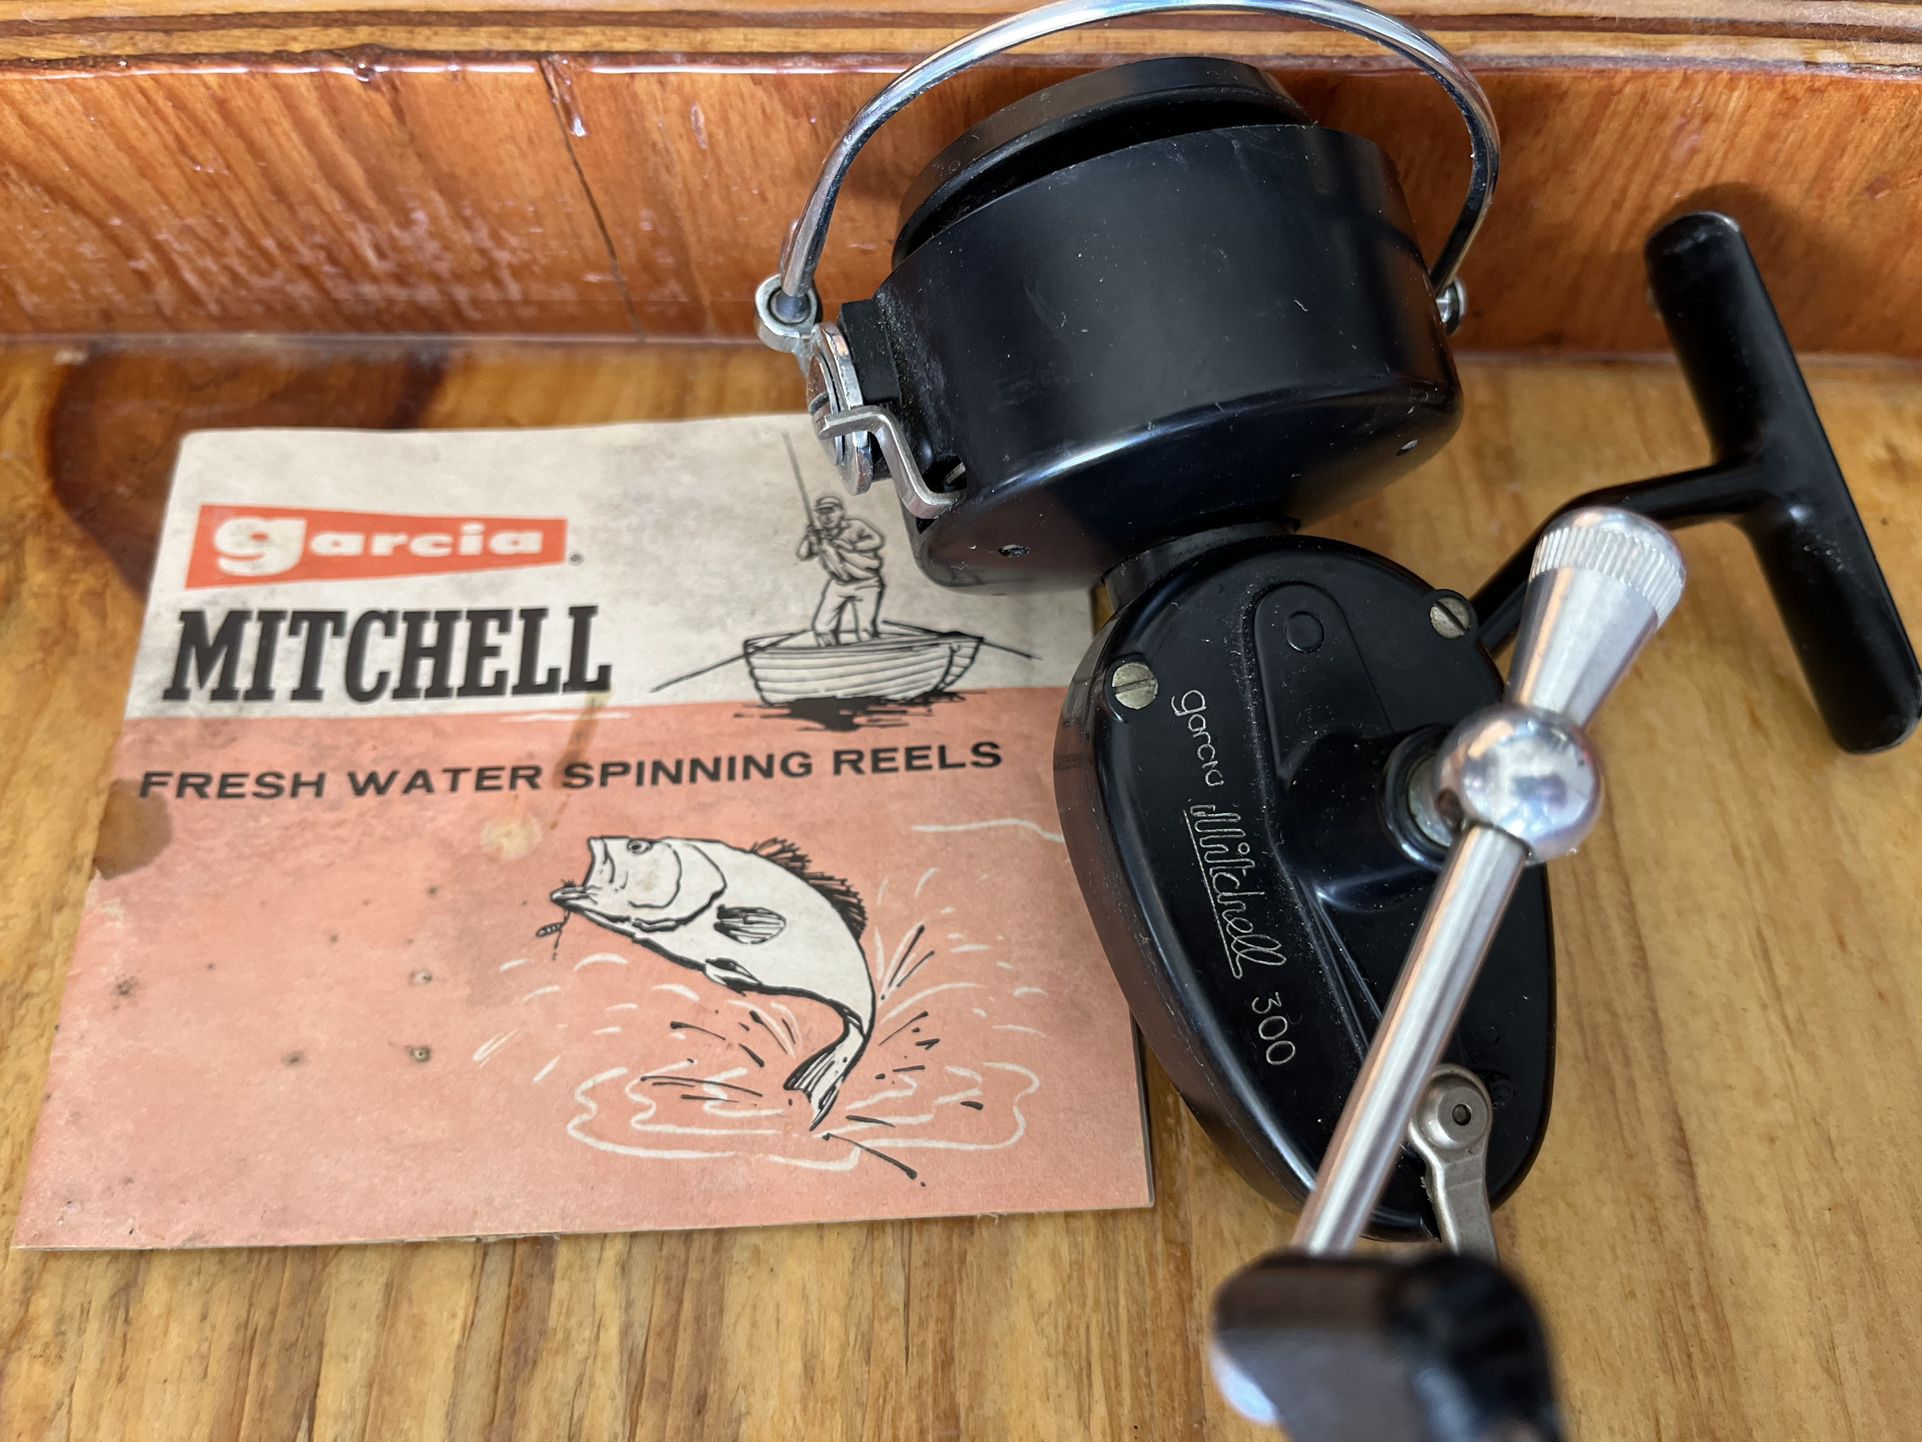 Vintage Garcia Mitchell 300 Spinning Reel for Sale in Dana Point